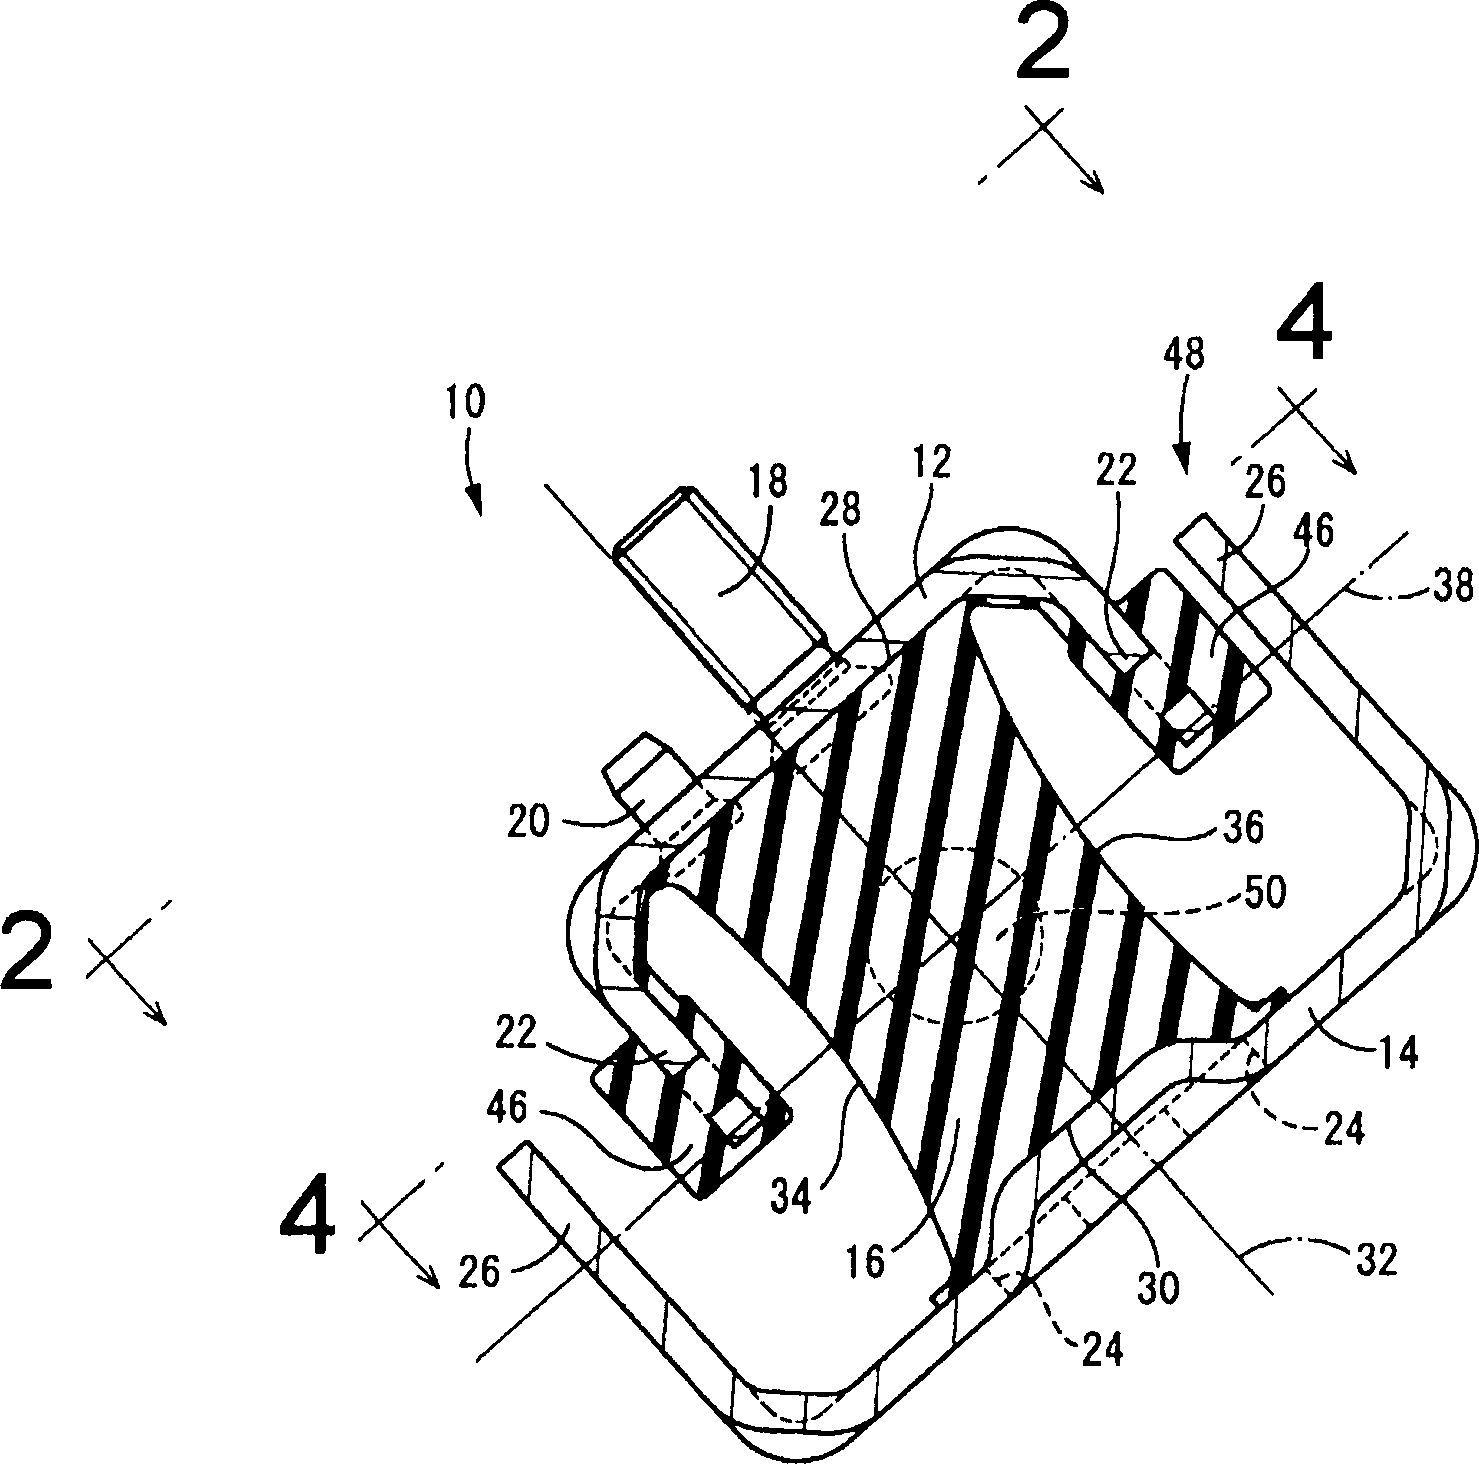 Engine carrier and shock-absorbing bearing structure employing the carrier